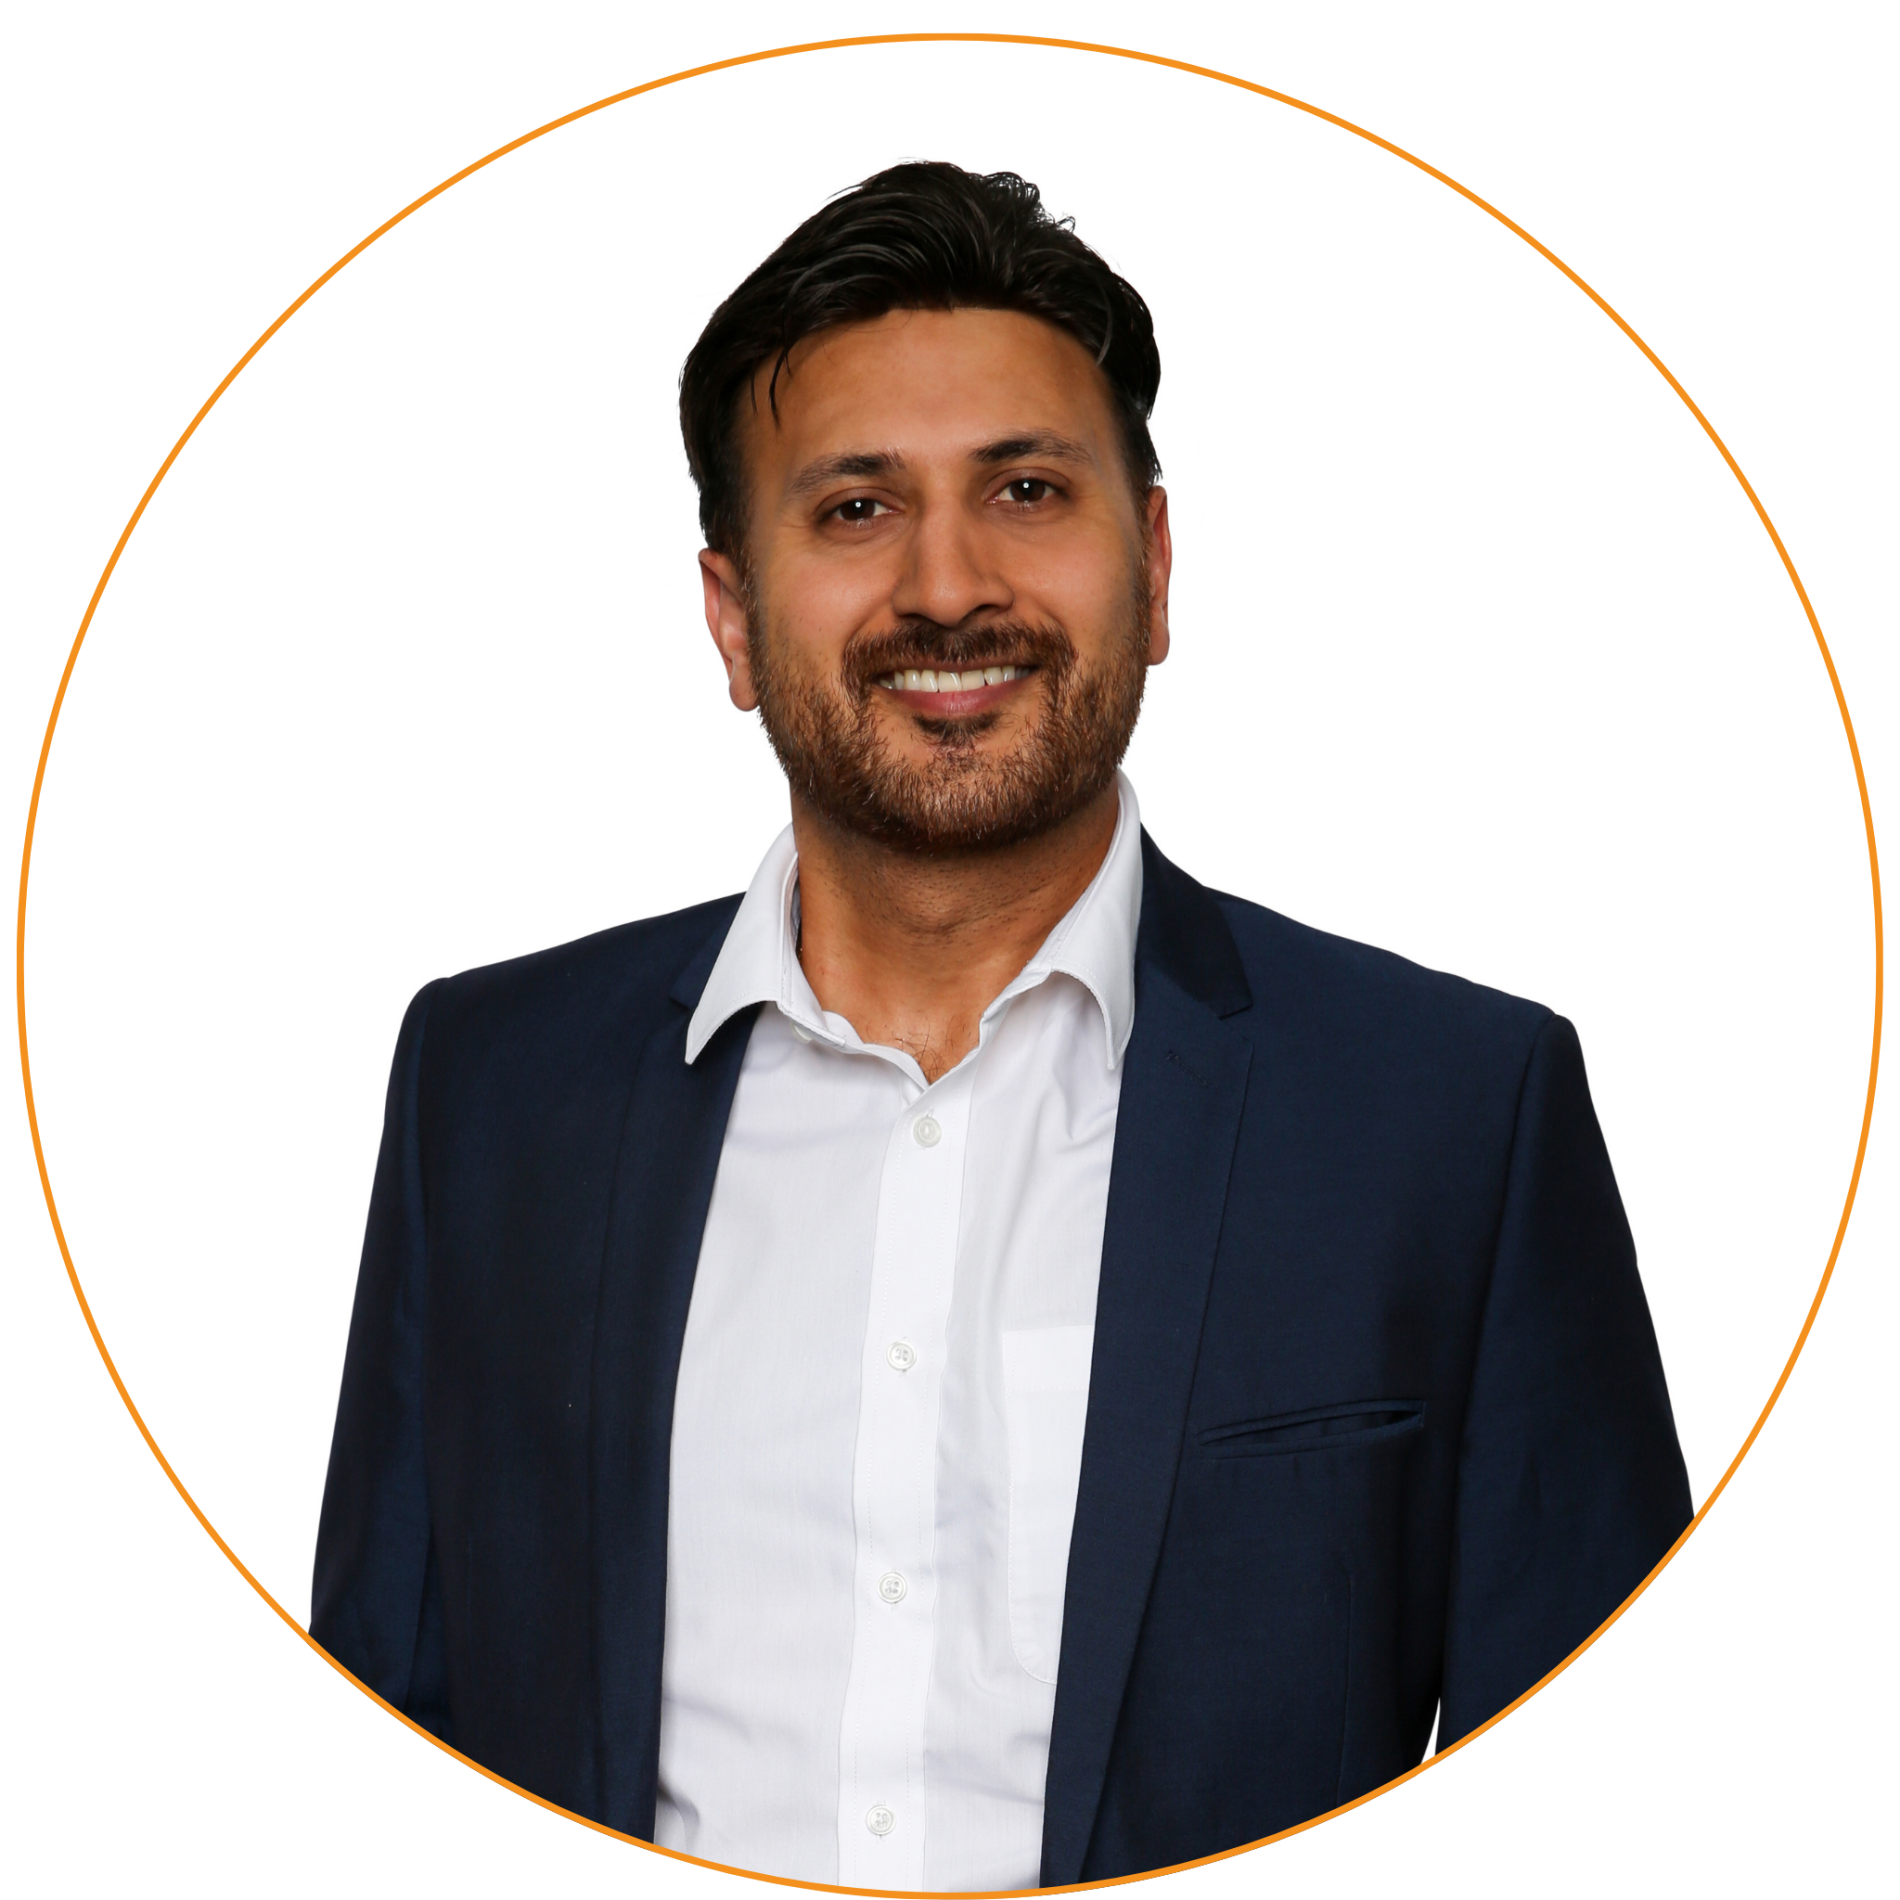 kunal gupta, finance and accounting, sydney jobs, axr recruitment and search, specialist recruiter, sydney recruitment agency